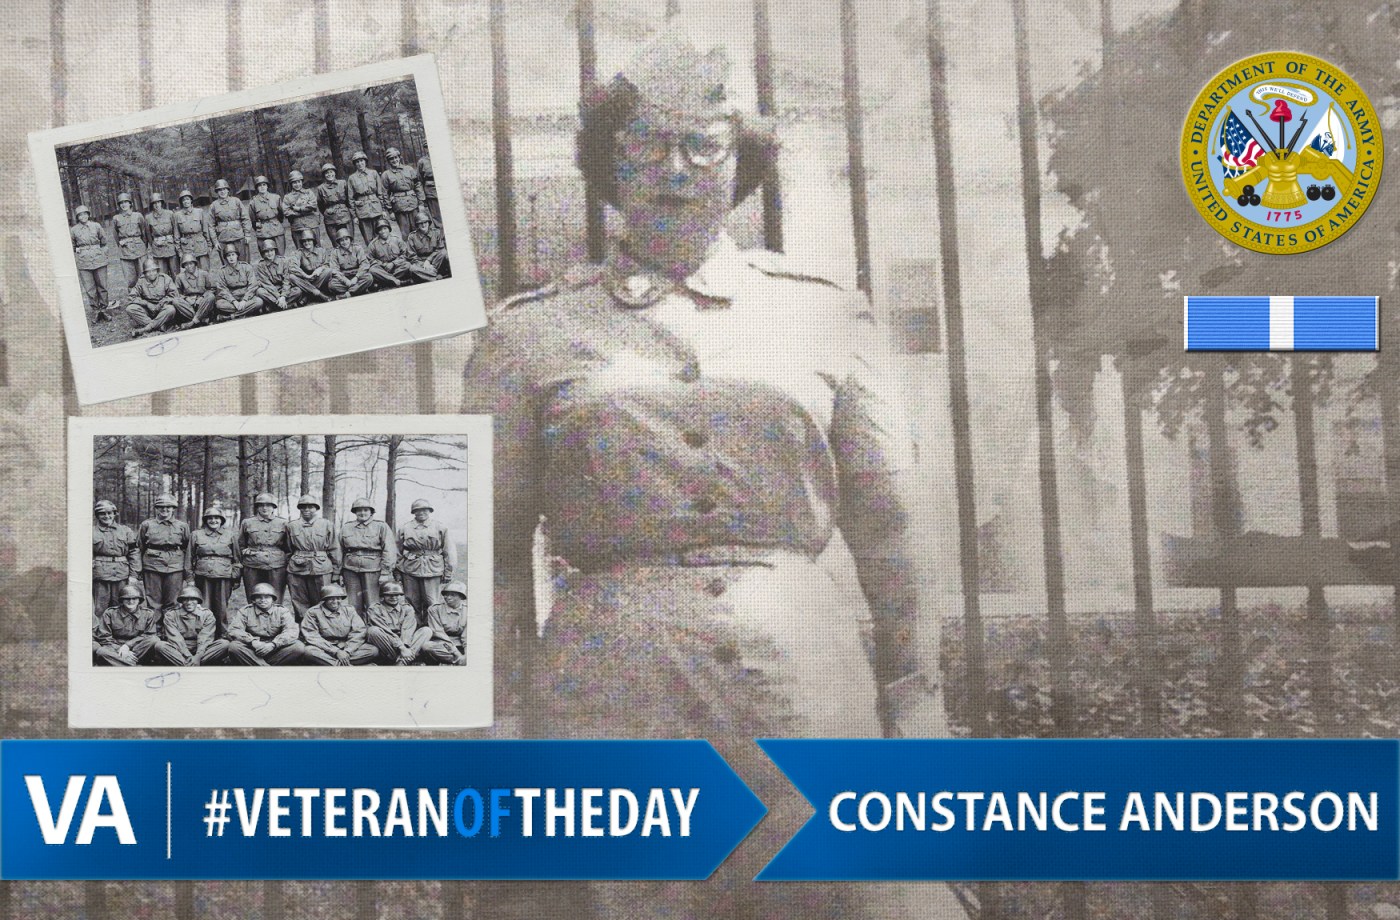 Constance Anderson - Veteran of the Day